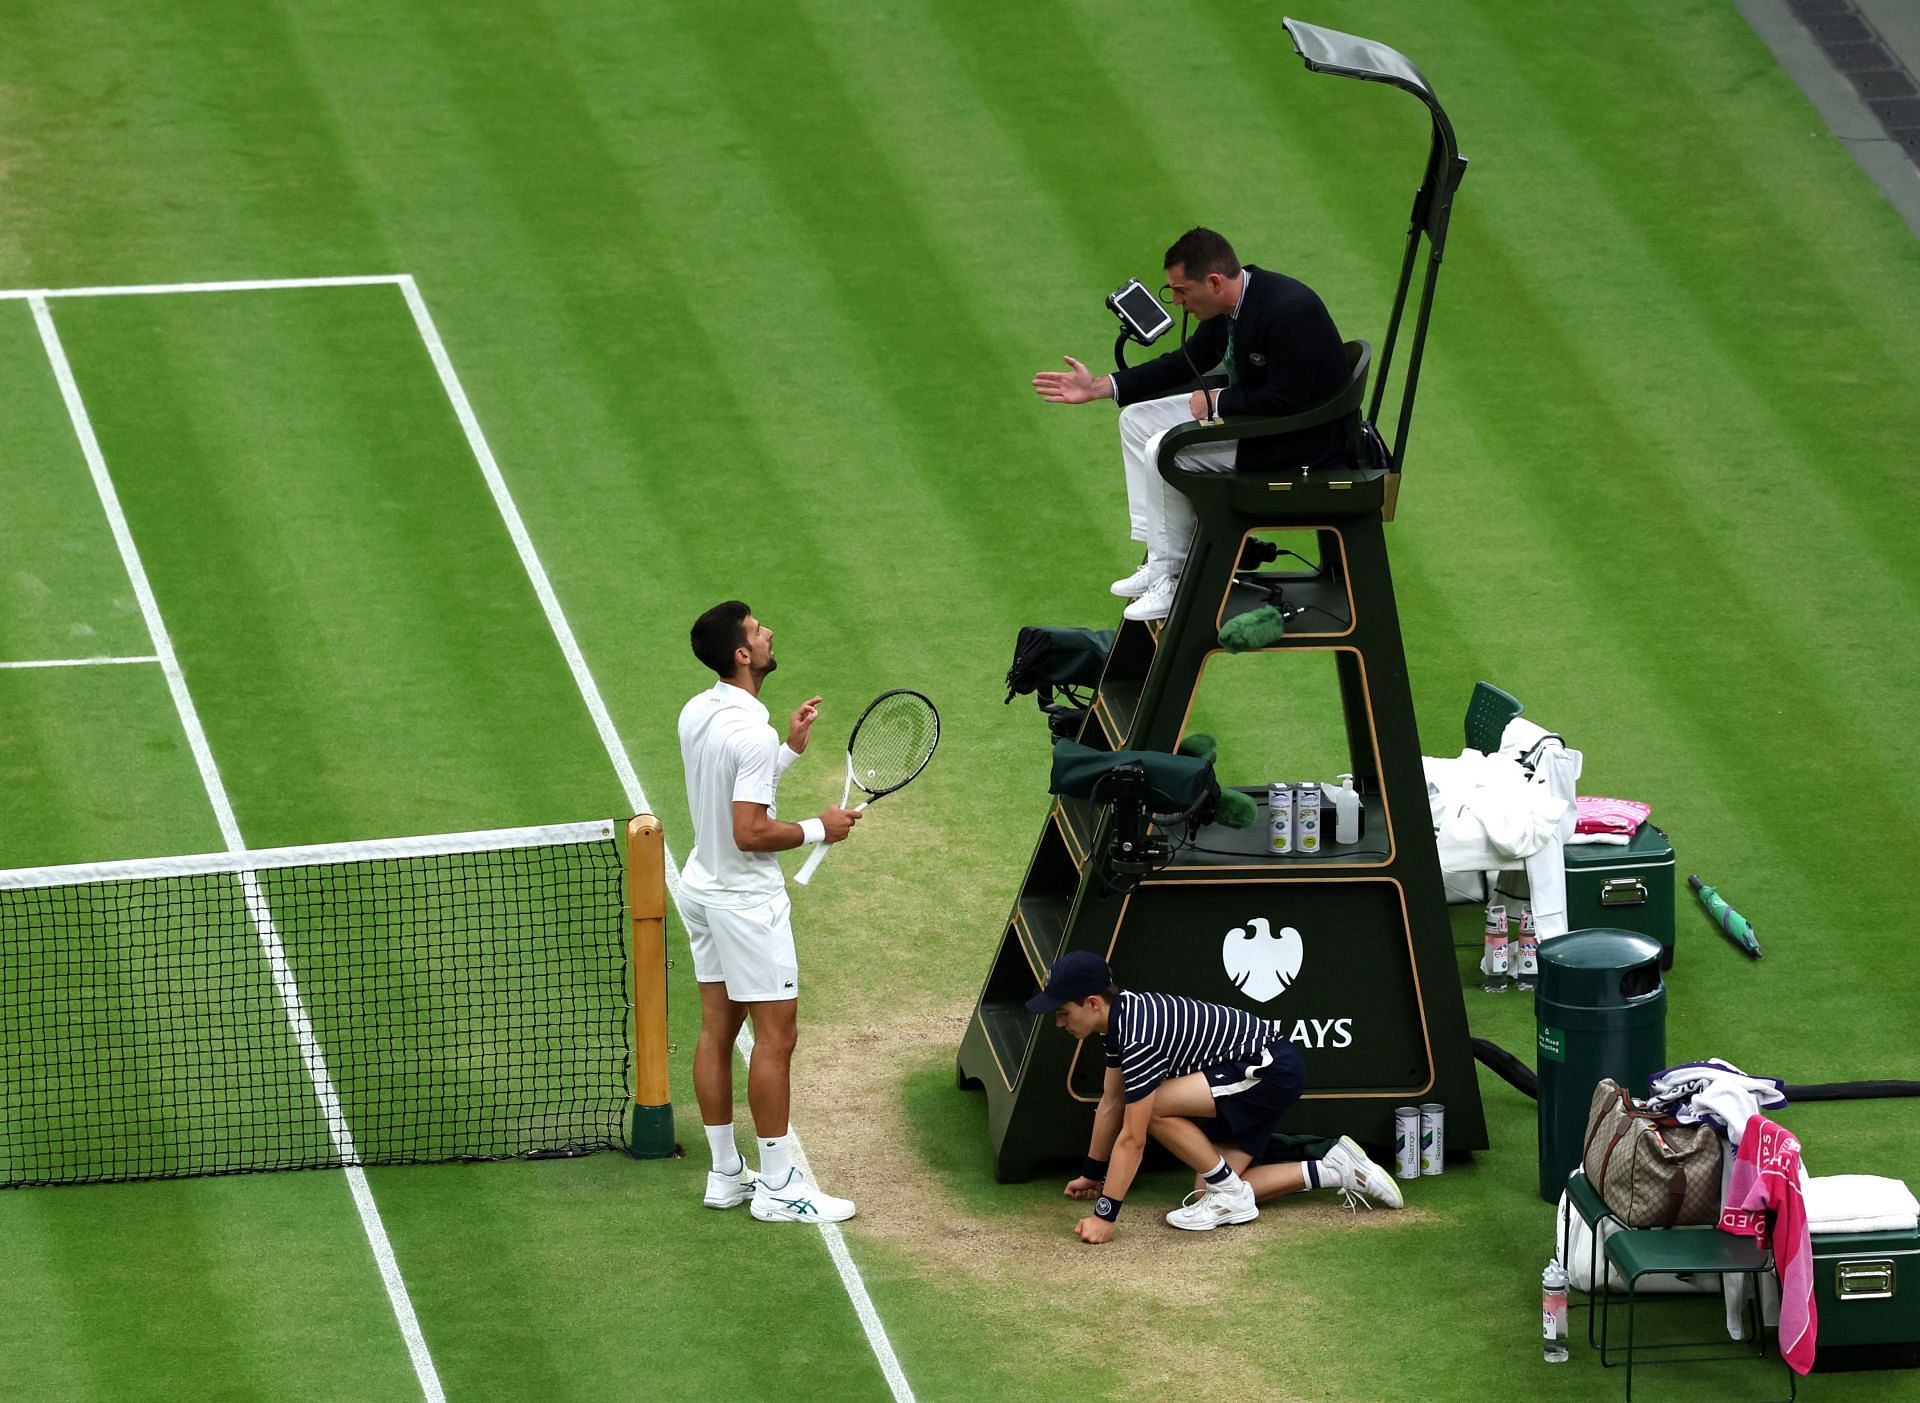 Novak Djokovic talks with chair umpire Richard Haigh after losing a point for hindrance.